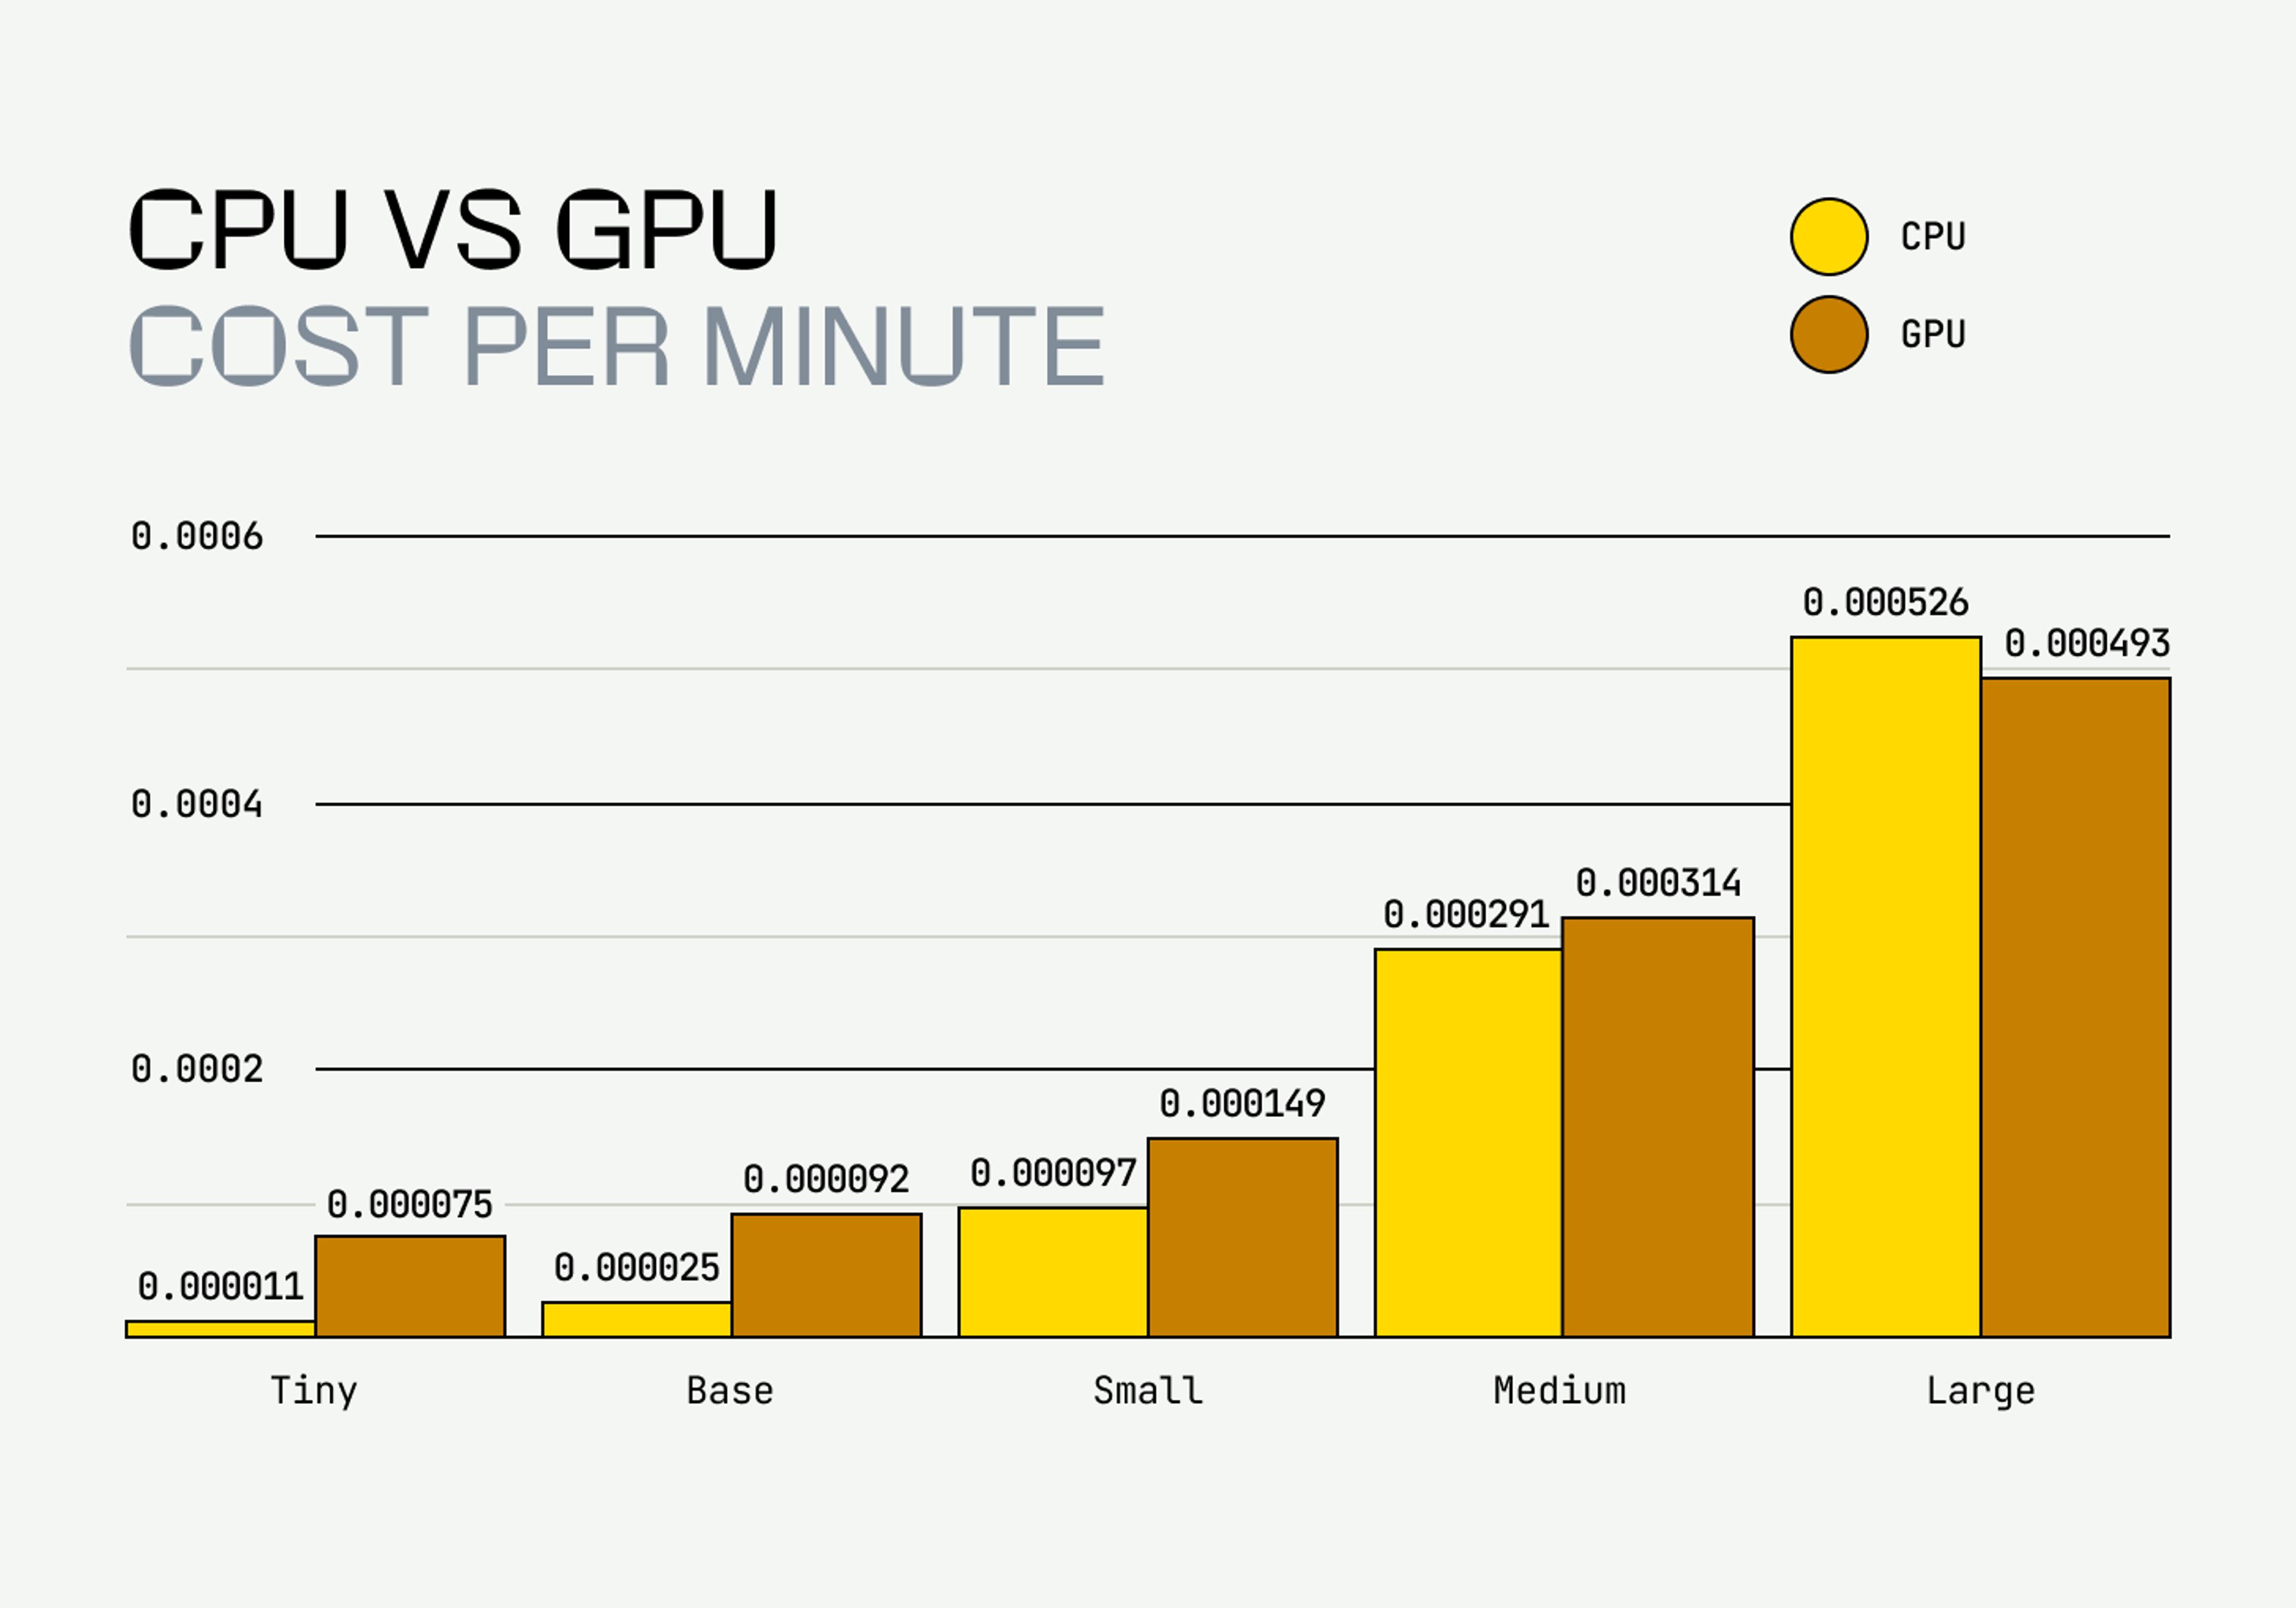 The image is a bar chart comparing the cost per minute of CPU versus GPU. There are five categories labeled as Tiny, Base, Small, Medium, and Large, each represented by two bars - one for CPU (yellow) and one for GPU (orange). The y-axis is labeled with values but without a clear unit of currency, ranging from 0.0000 to 0.0006, while the x-axis lists the categories. The cost increases from Tiny to Large, with CPU costs consistently lower than GPU costs in each category until the Large model is reached. The top of the chart has a title "CPU VS GPU COST PER MINUTE" and a legend that associates yellow with CPU and orange with GPU.